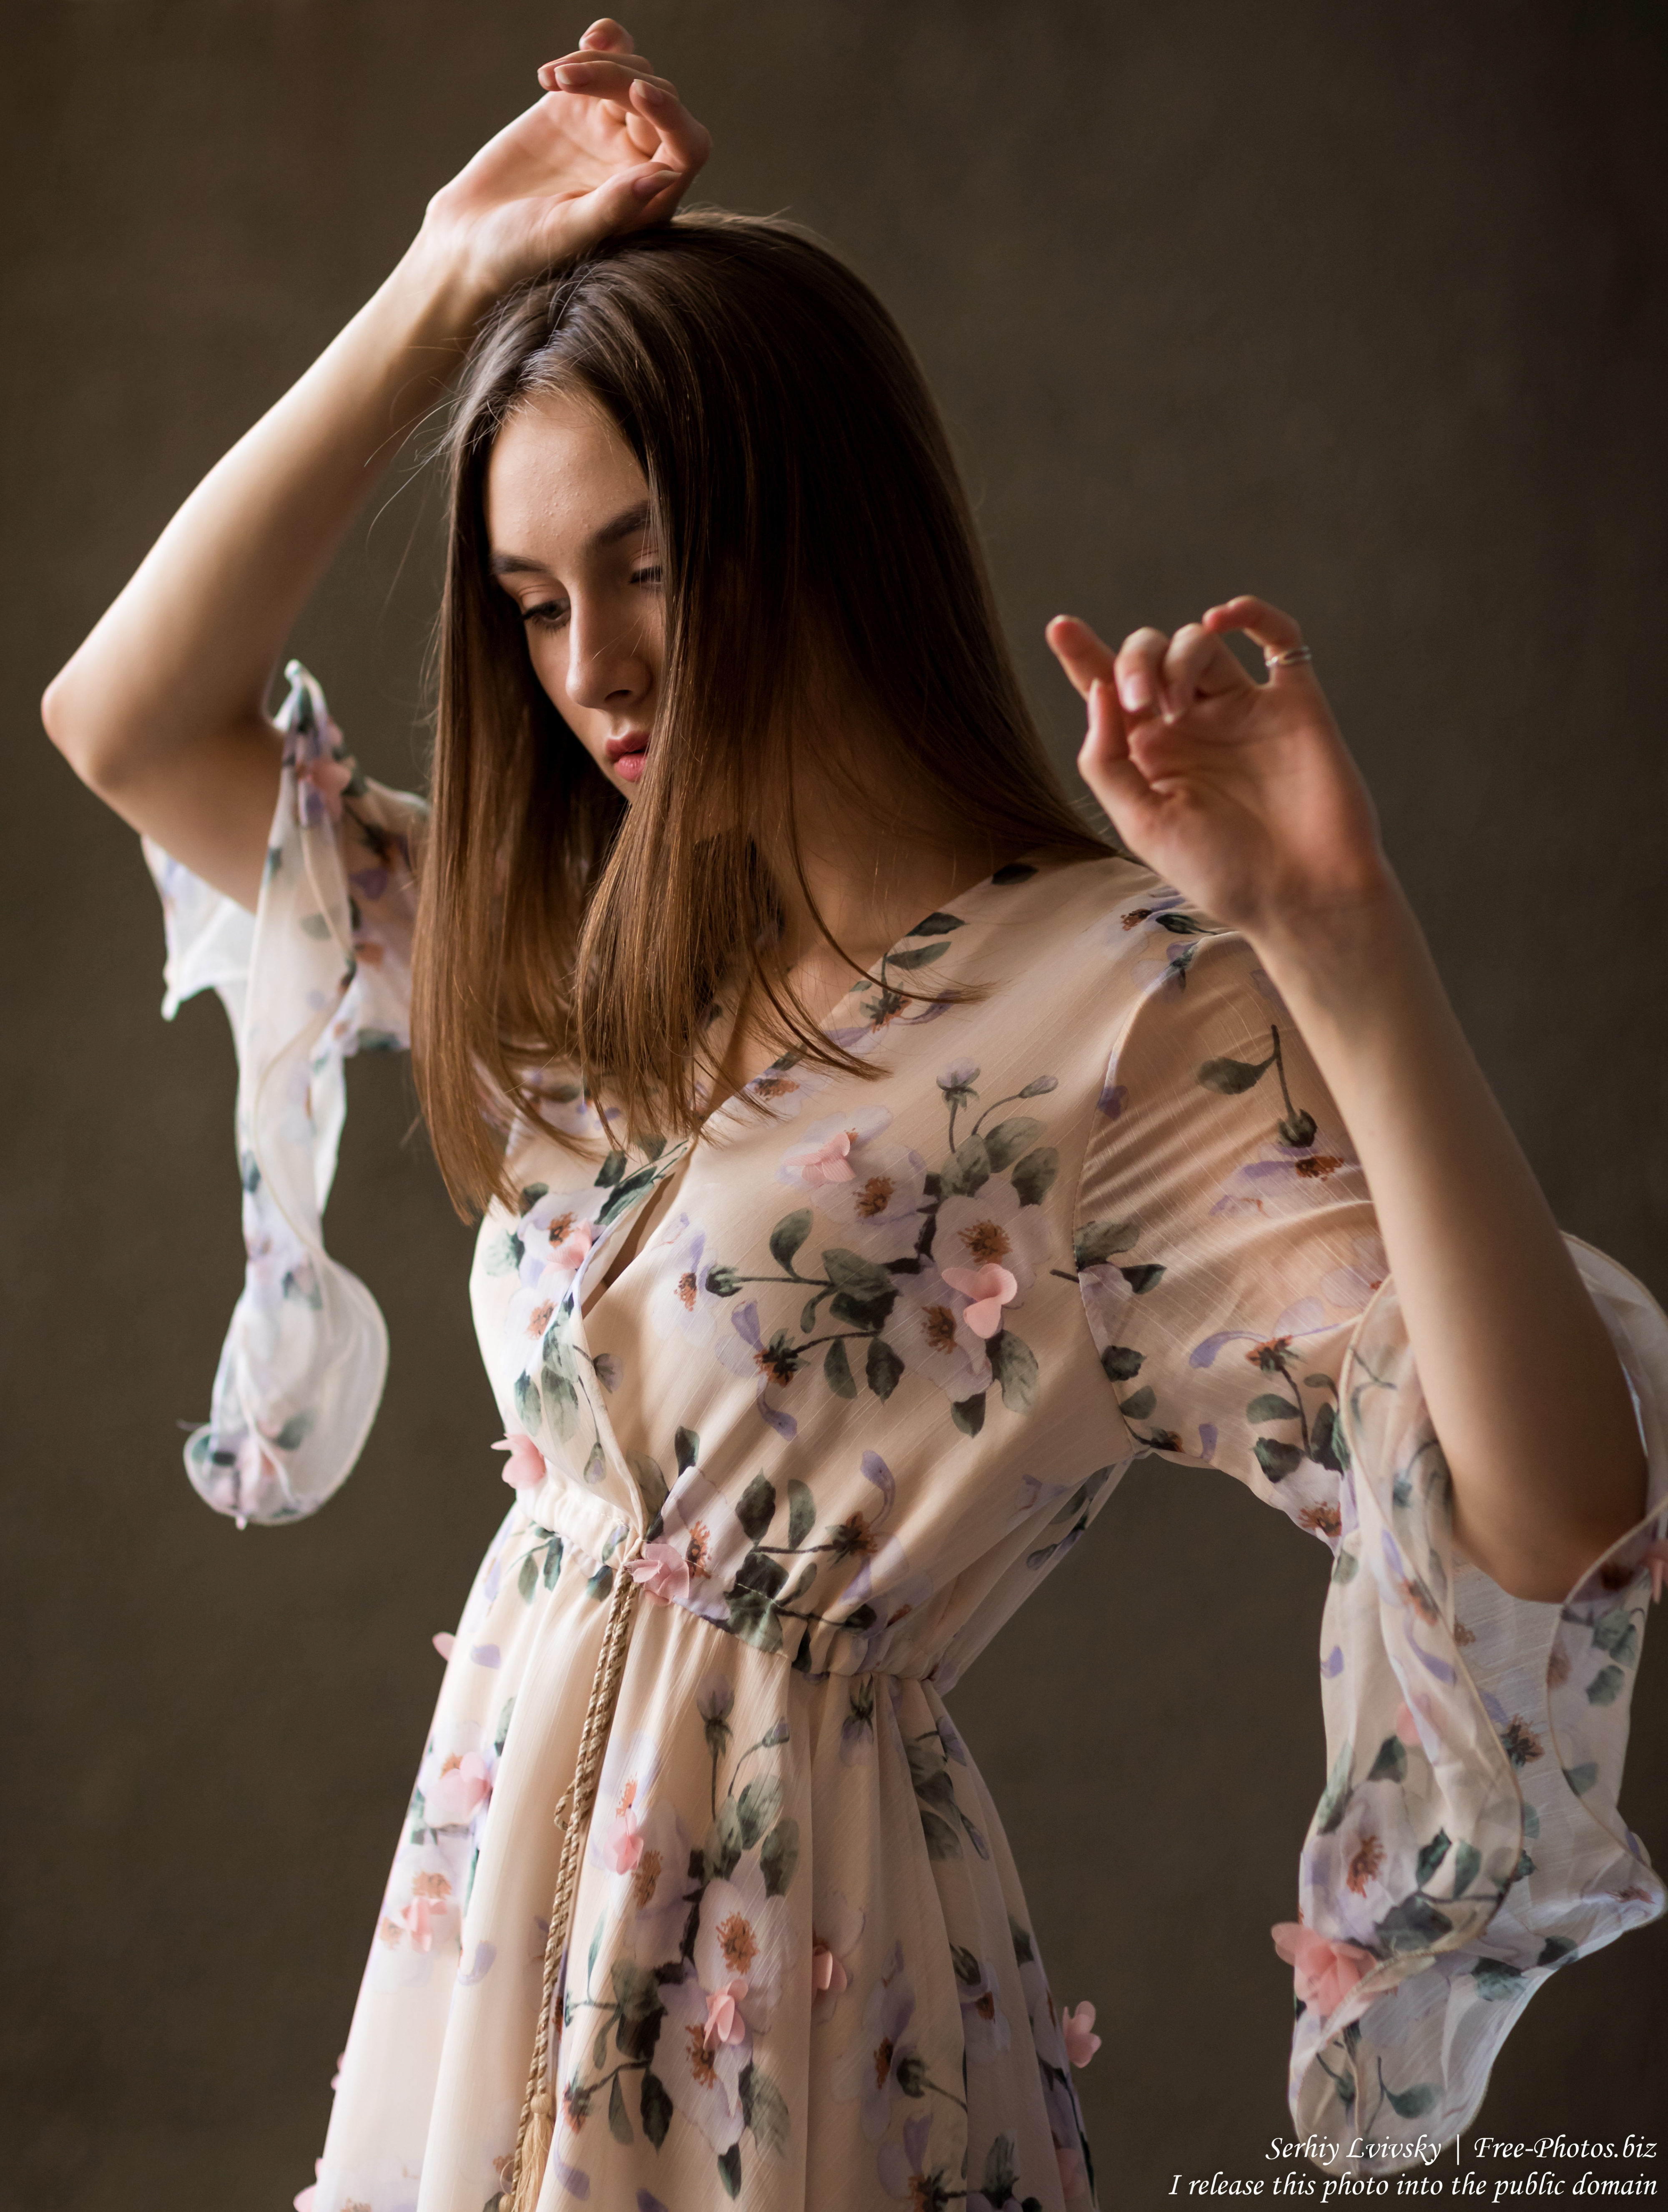 julia_a_15-year-old_girl_photographed_in_july_2019_by_serhiy_lvivsky_13